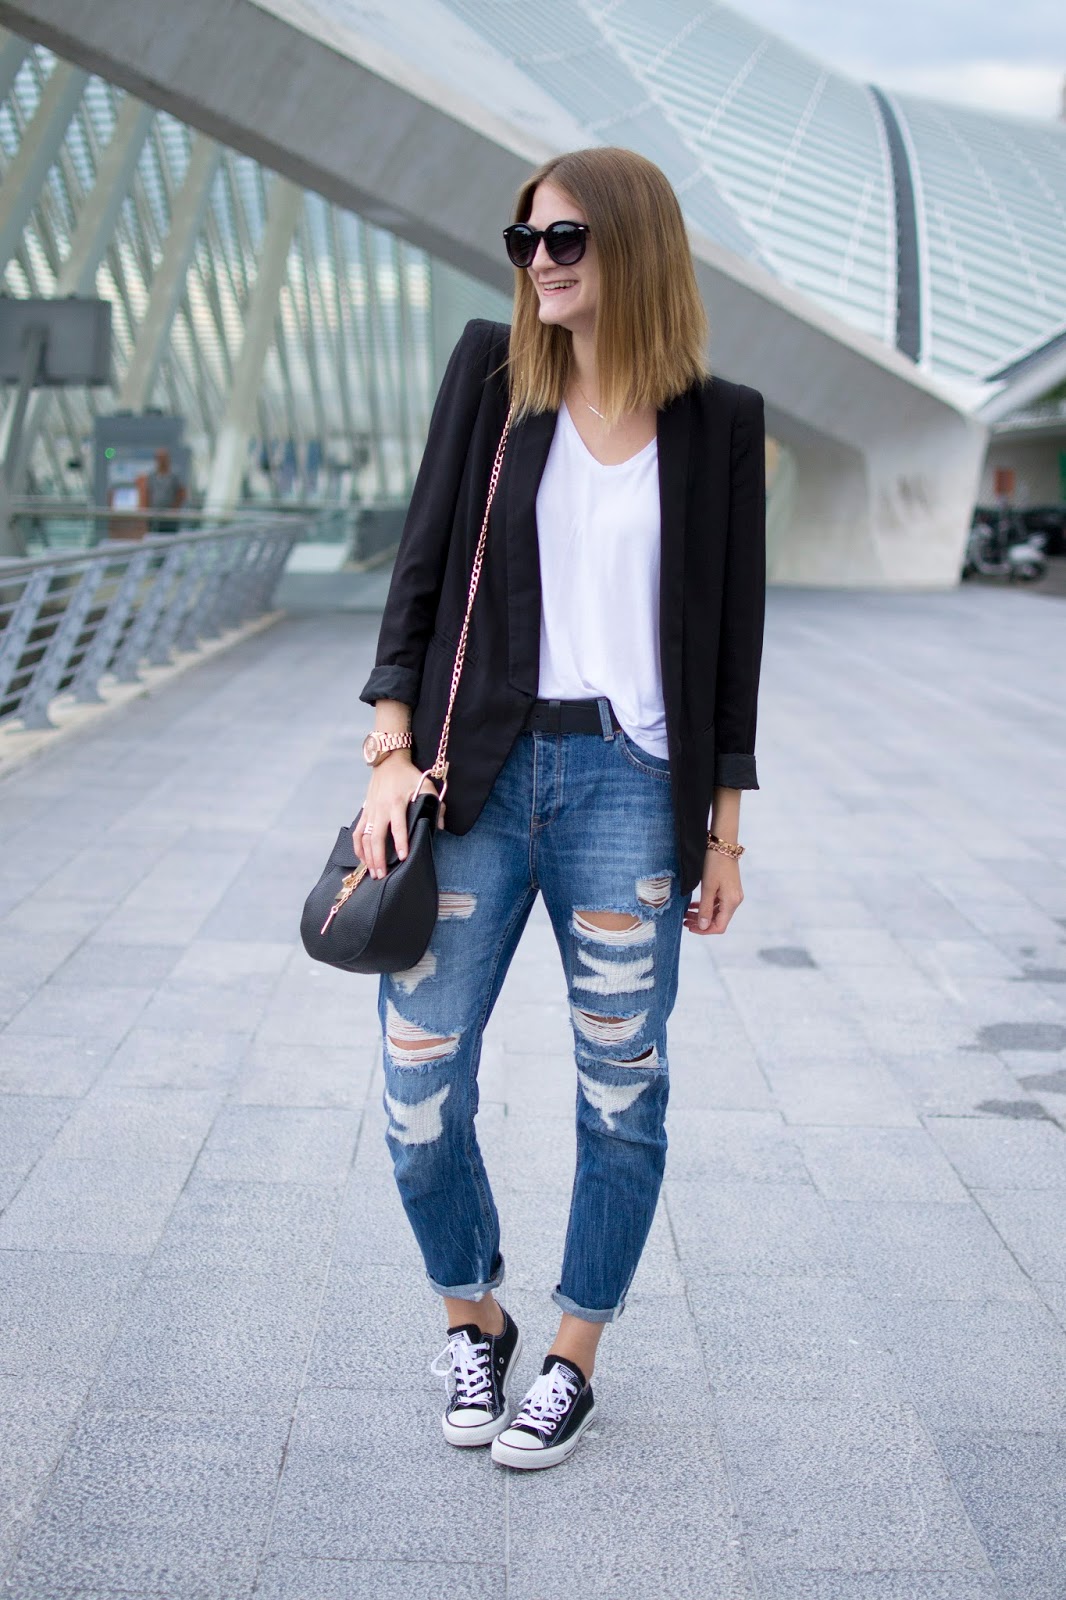 Top 55+ images boyfriend jeans and converse - In.thptnganamst.edu.vn